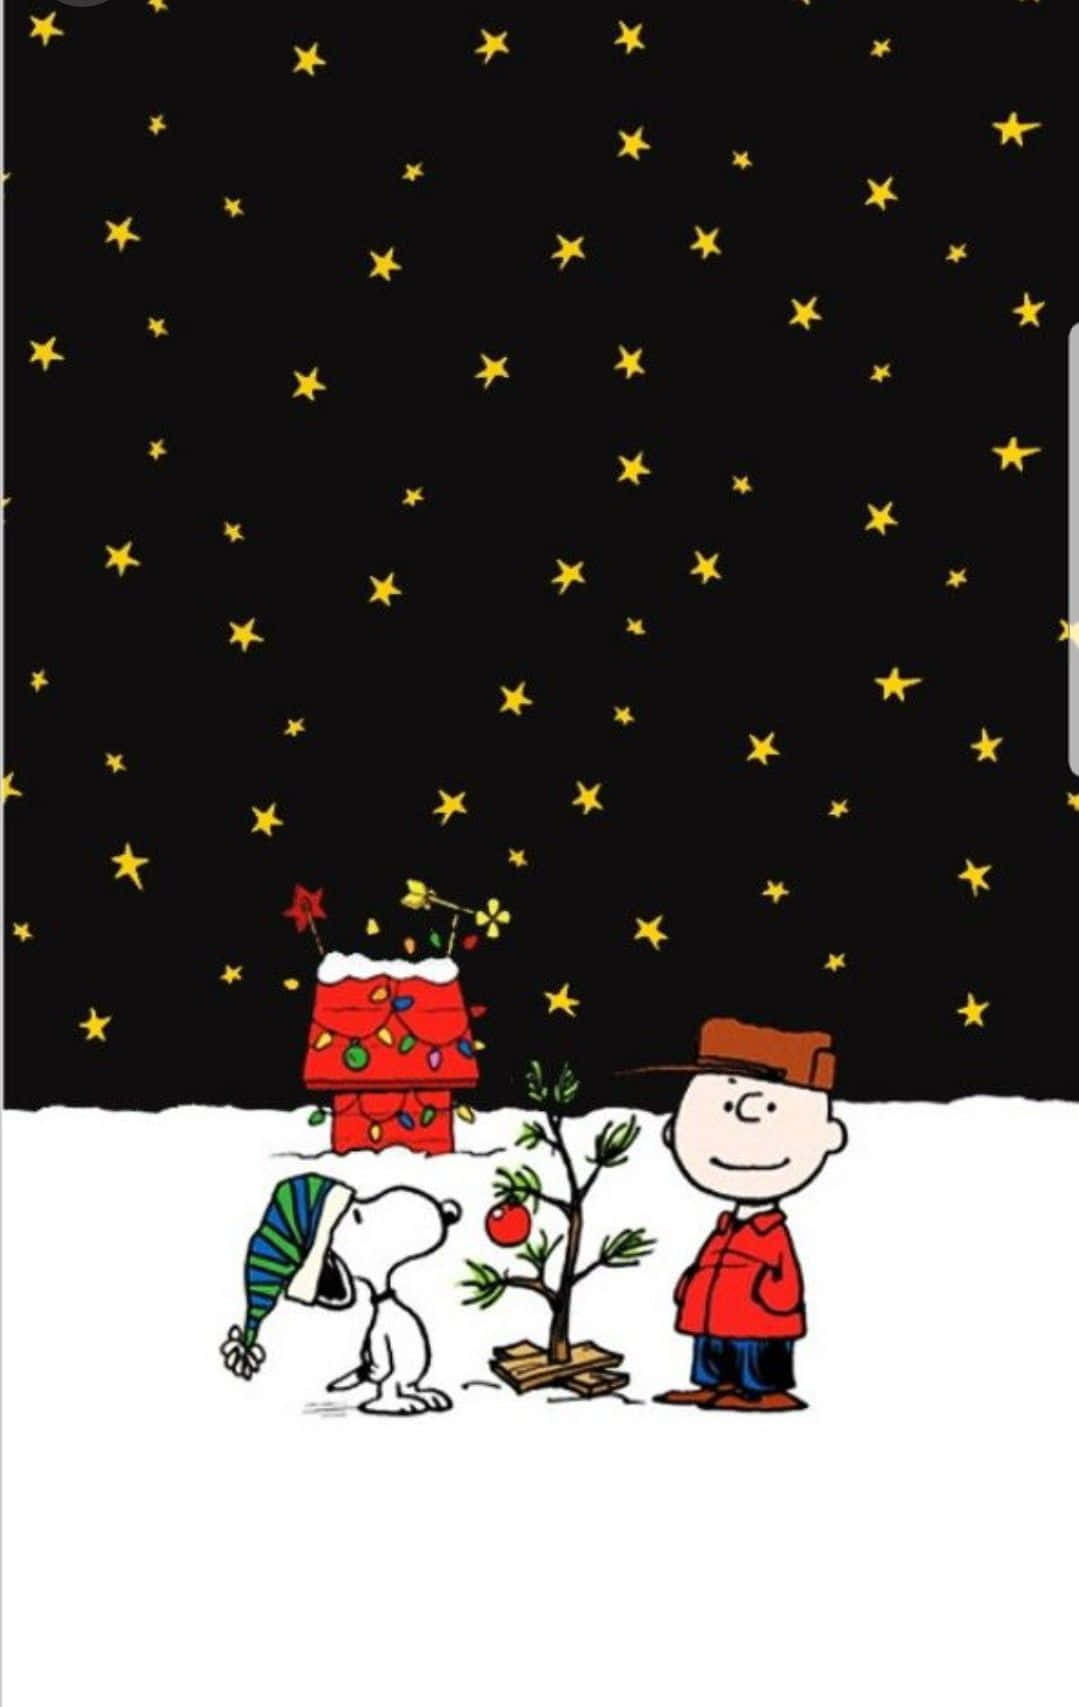 Cute Snoopy Christmas Dark Evening With Stars Wallpaper